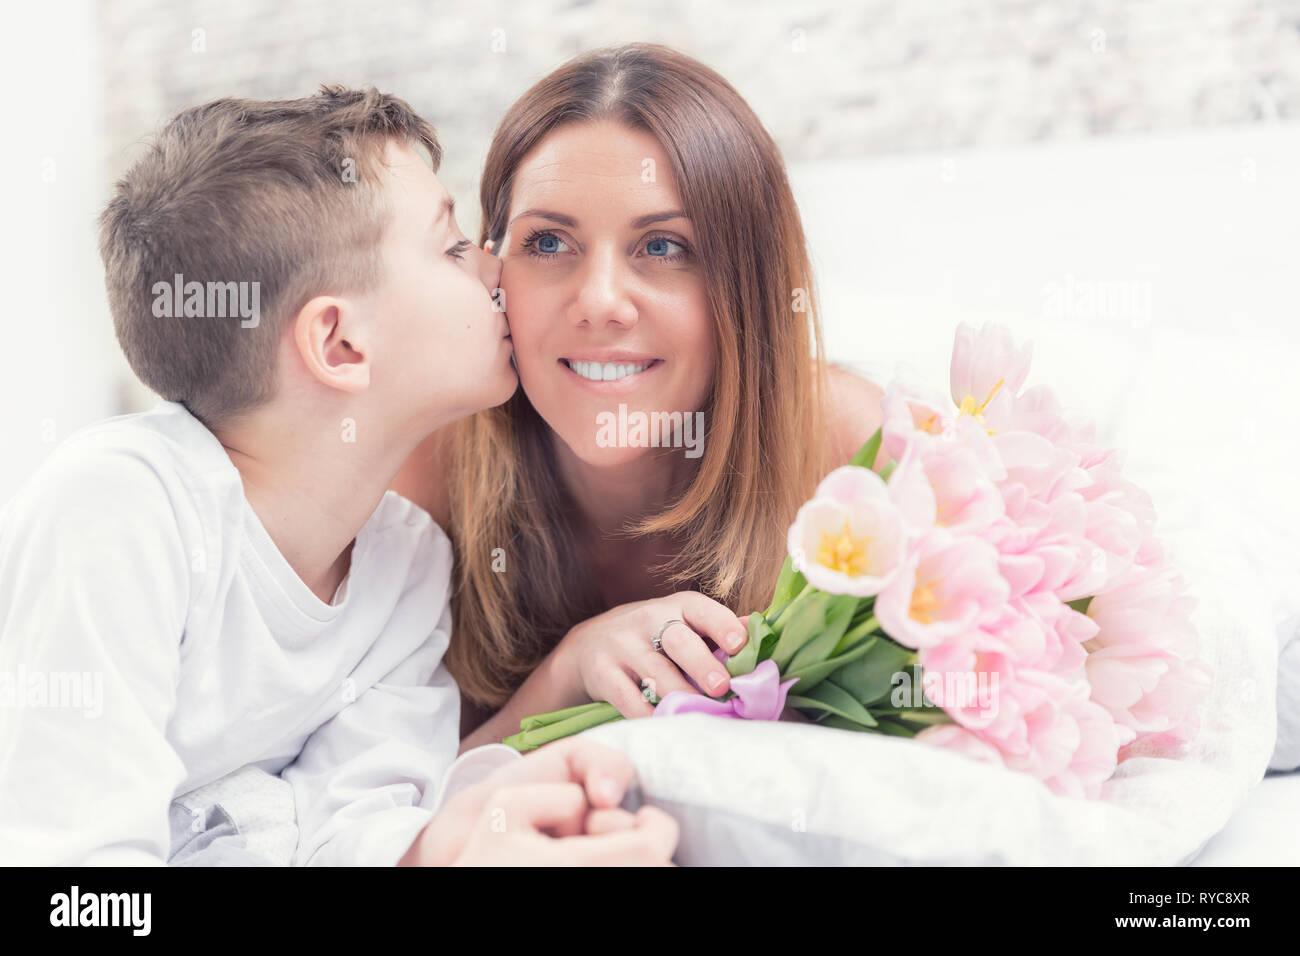 Happy Mother S Day Concept Mom With Son On Bed With T And Tulips Son Kisses His Mom Stock